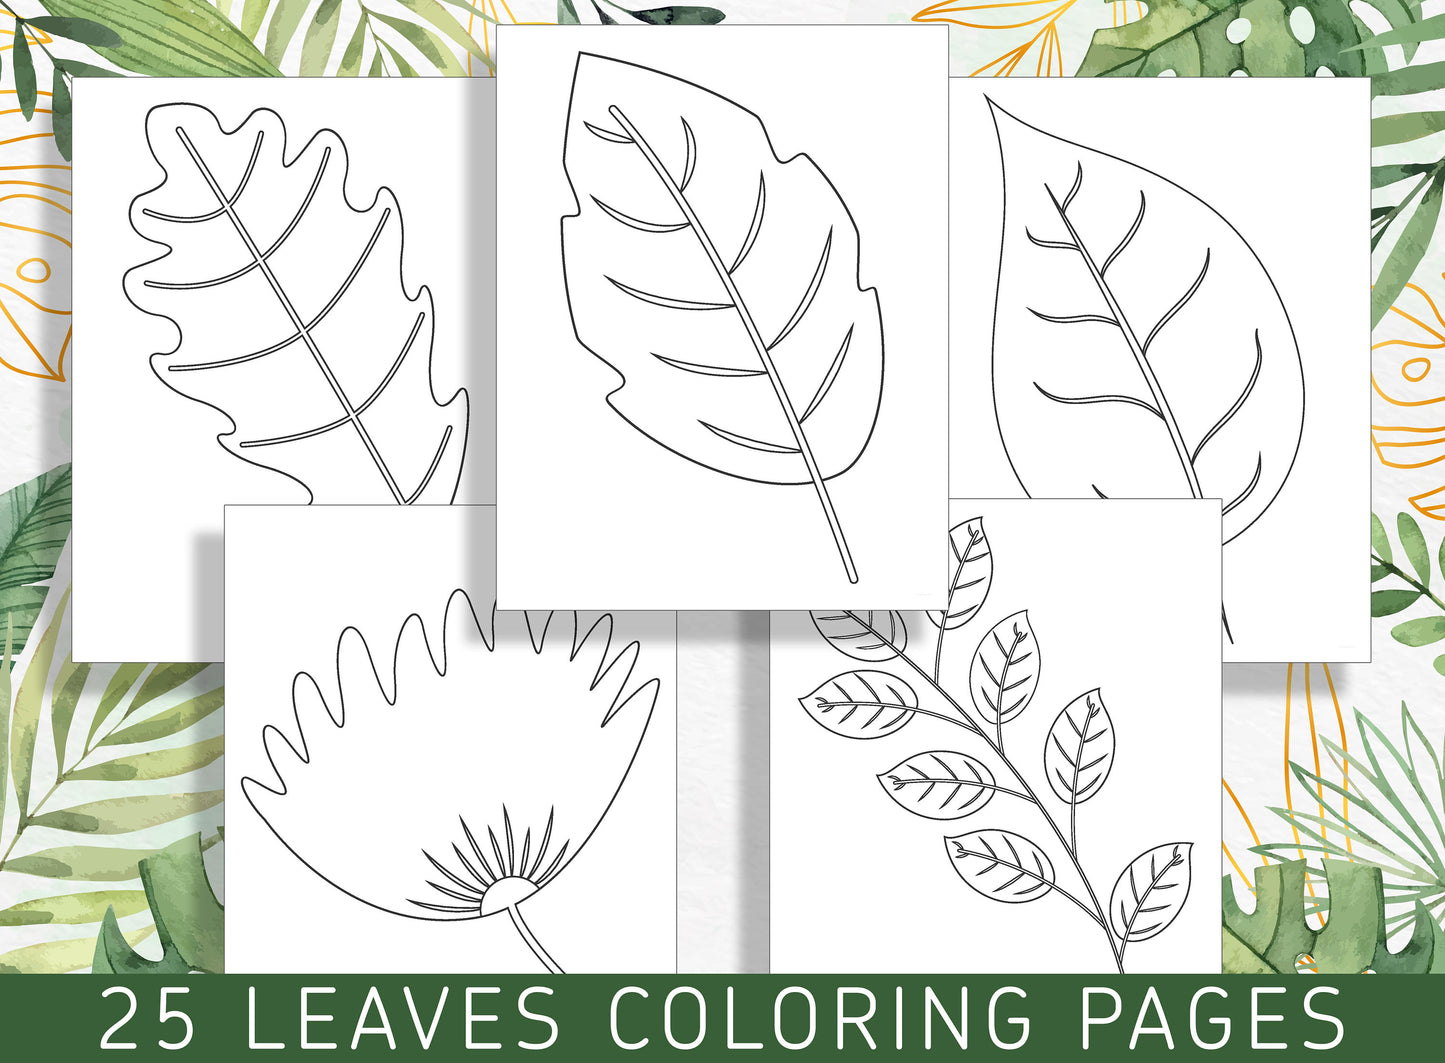 Escape to Nature: 25 Exquisite Leaf Coloring Pages for Stress Relief and Relaxation, PDF File, Instant Download